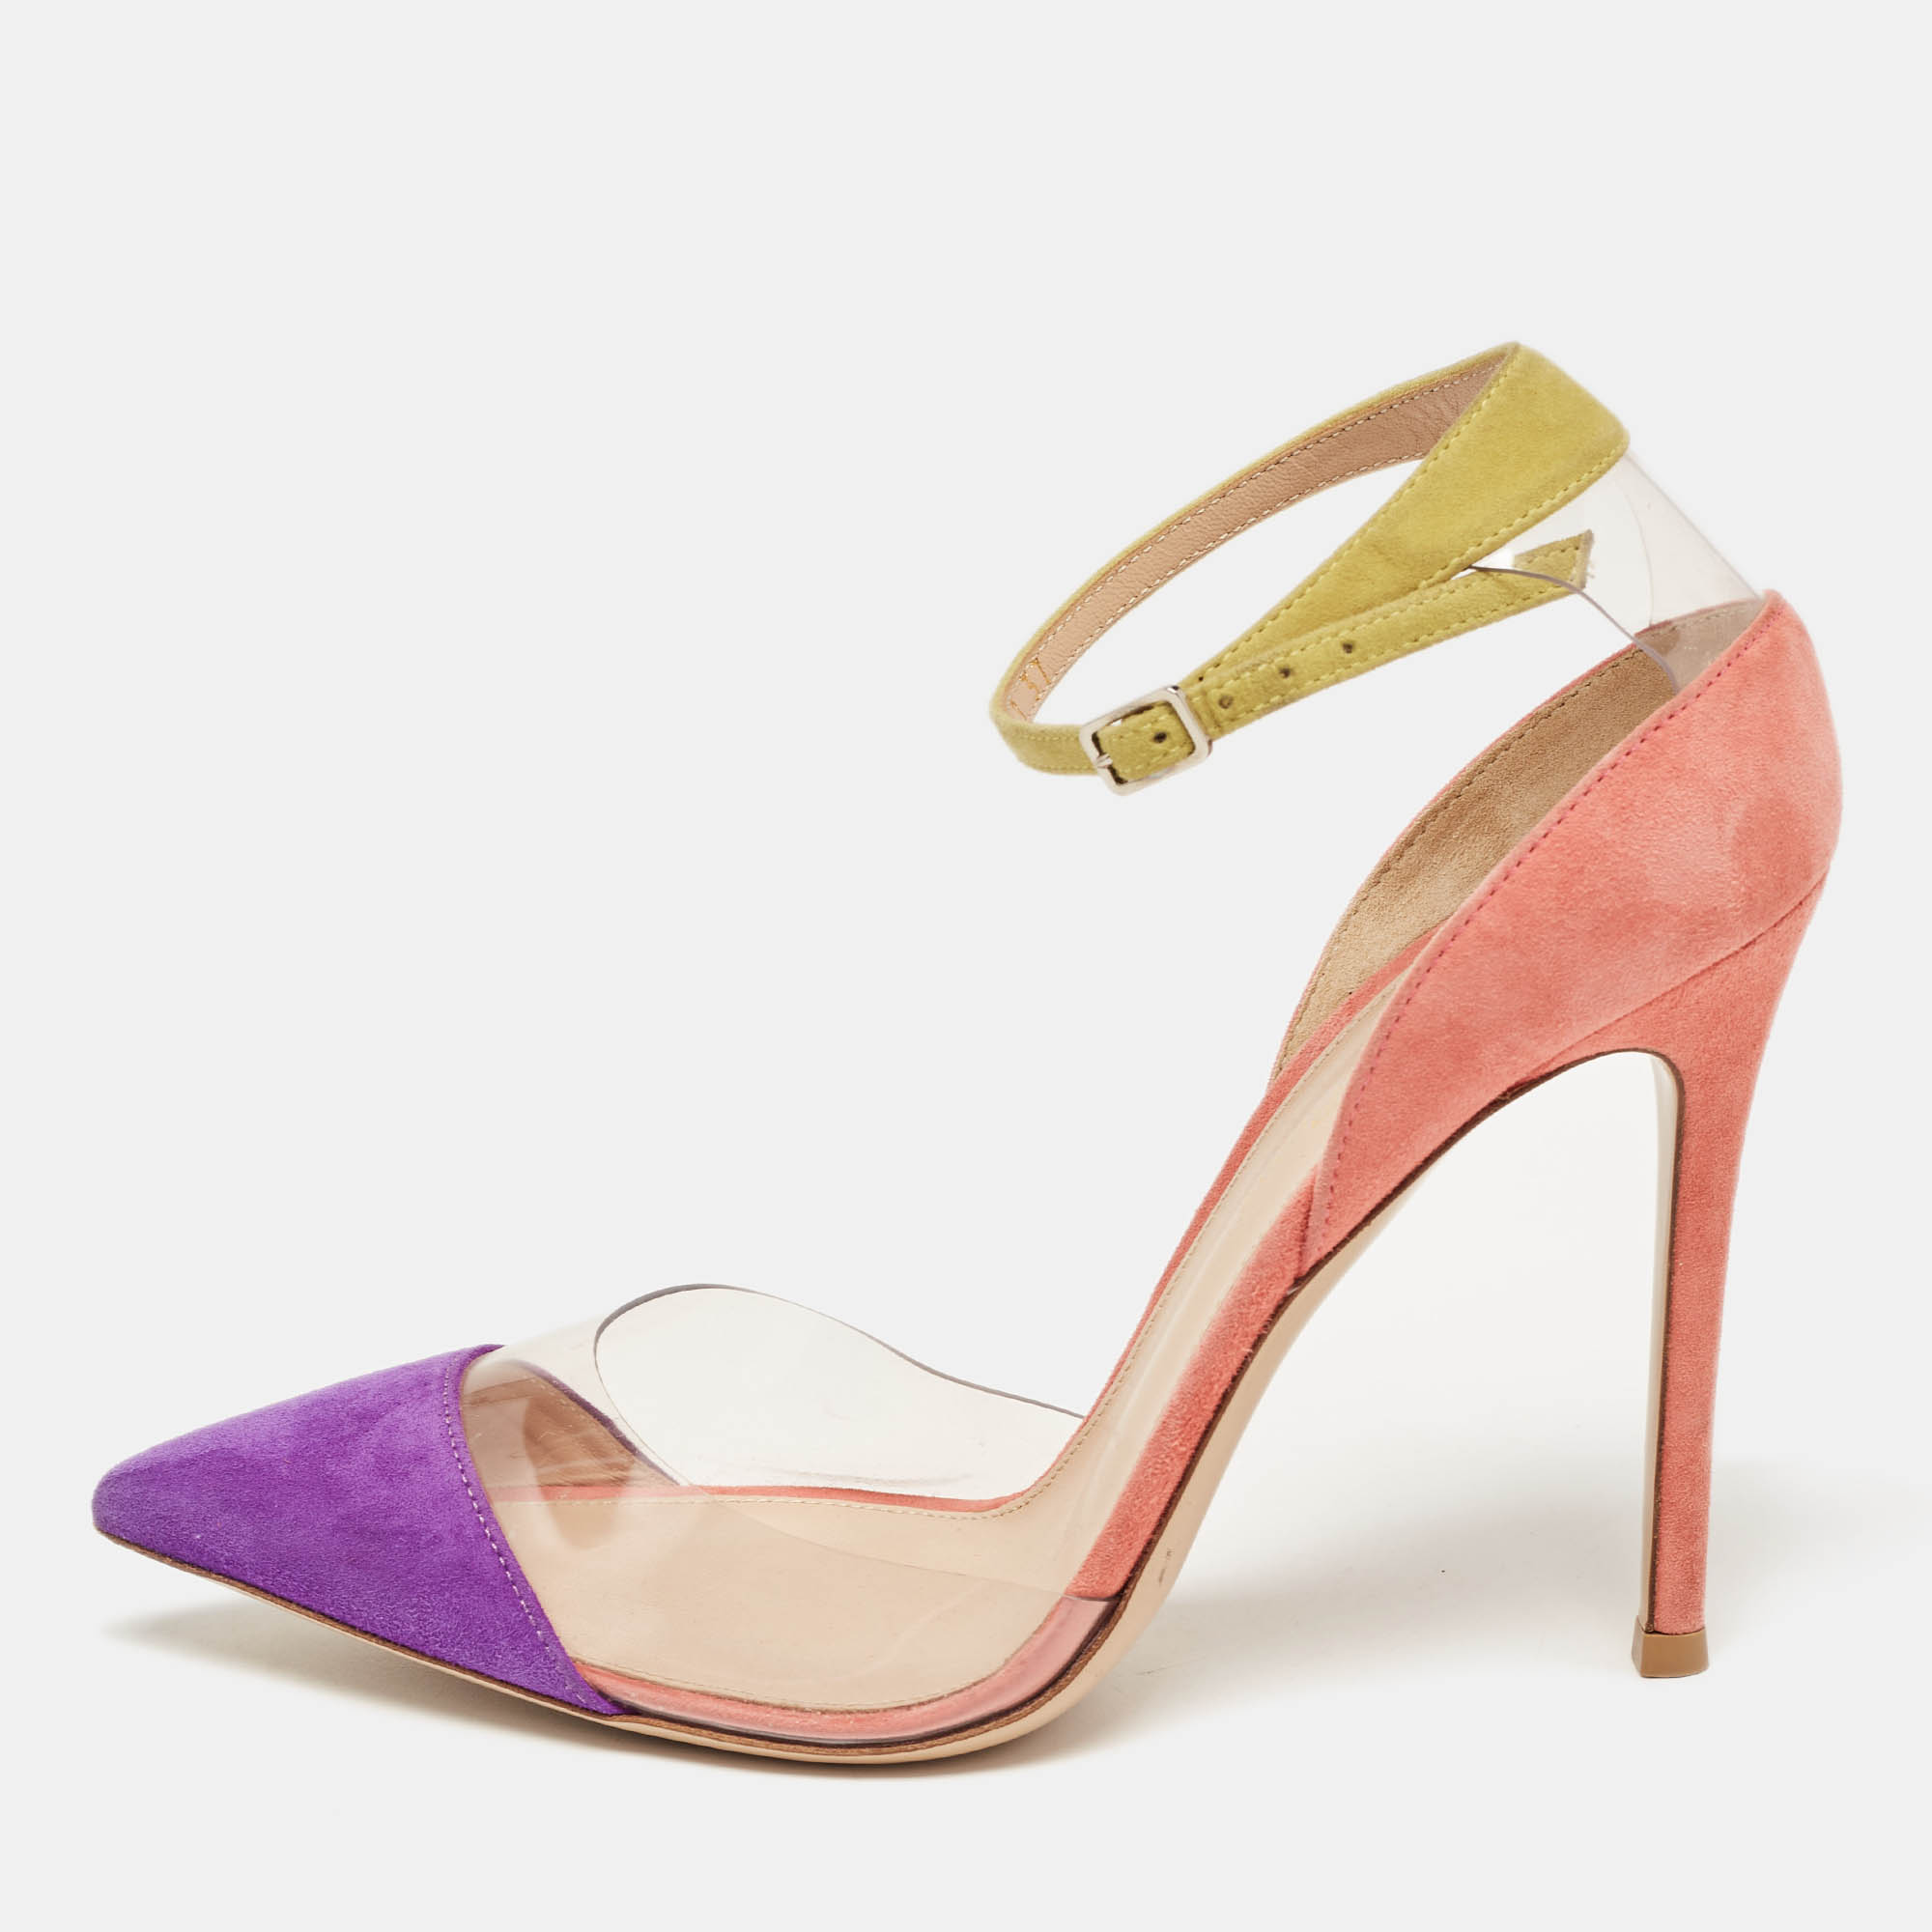 Gianvito Rossi Multicolor Suede And PVC Ankle Strap Pointed Toe Pumps Size 37